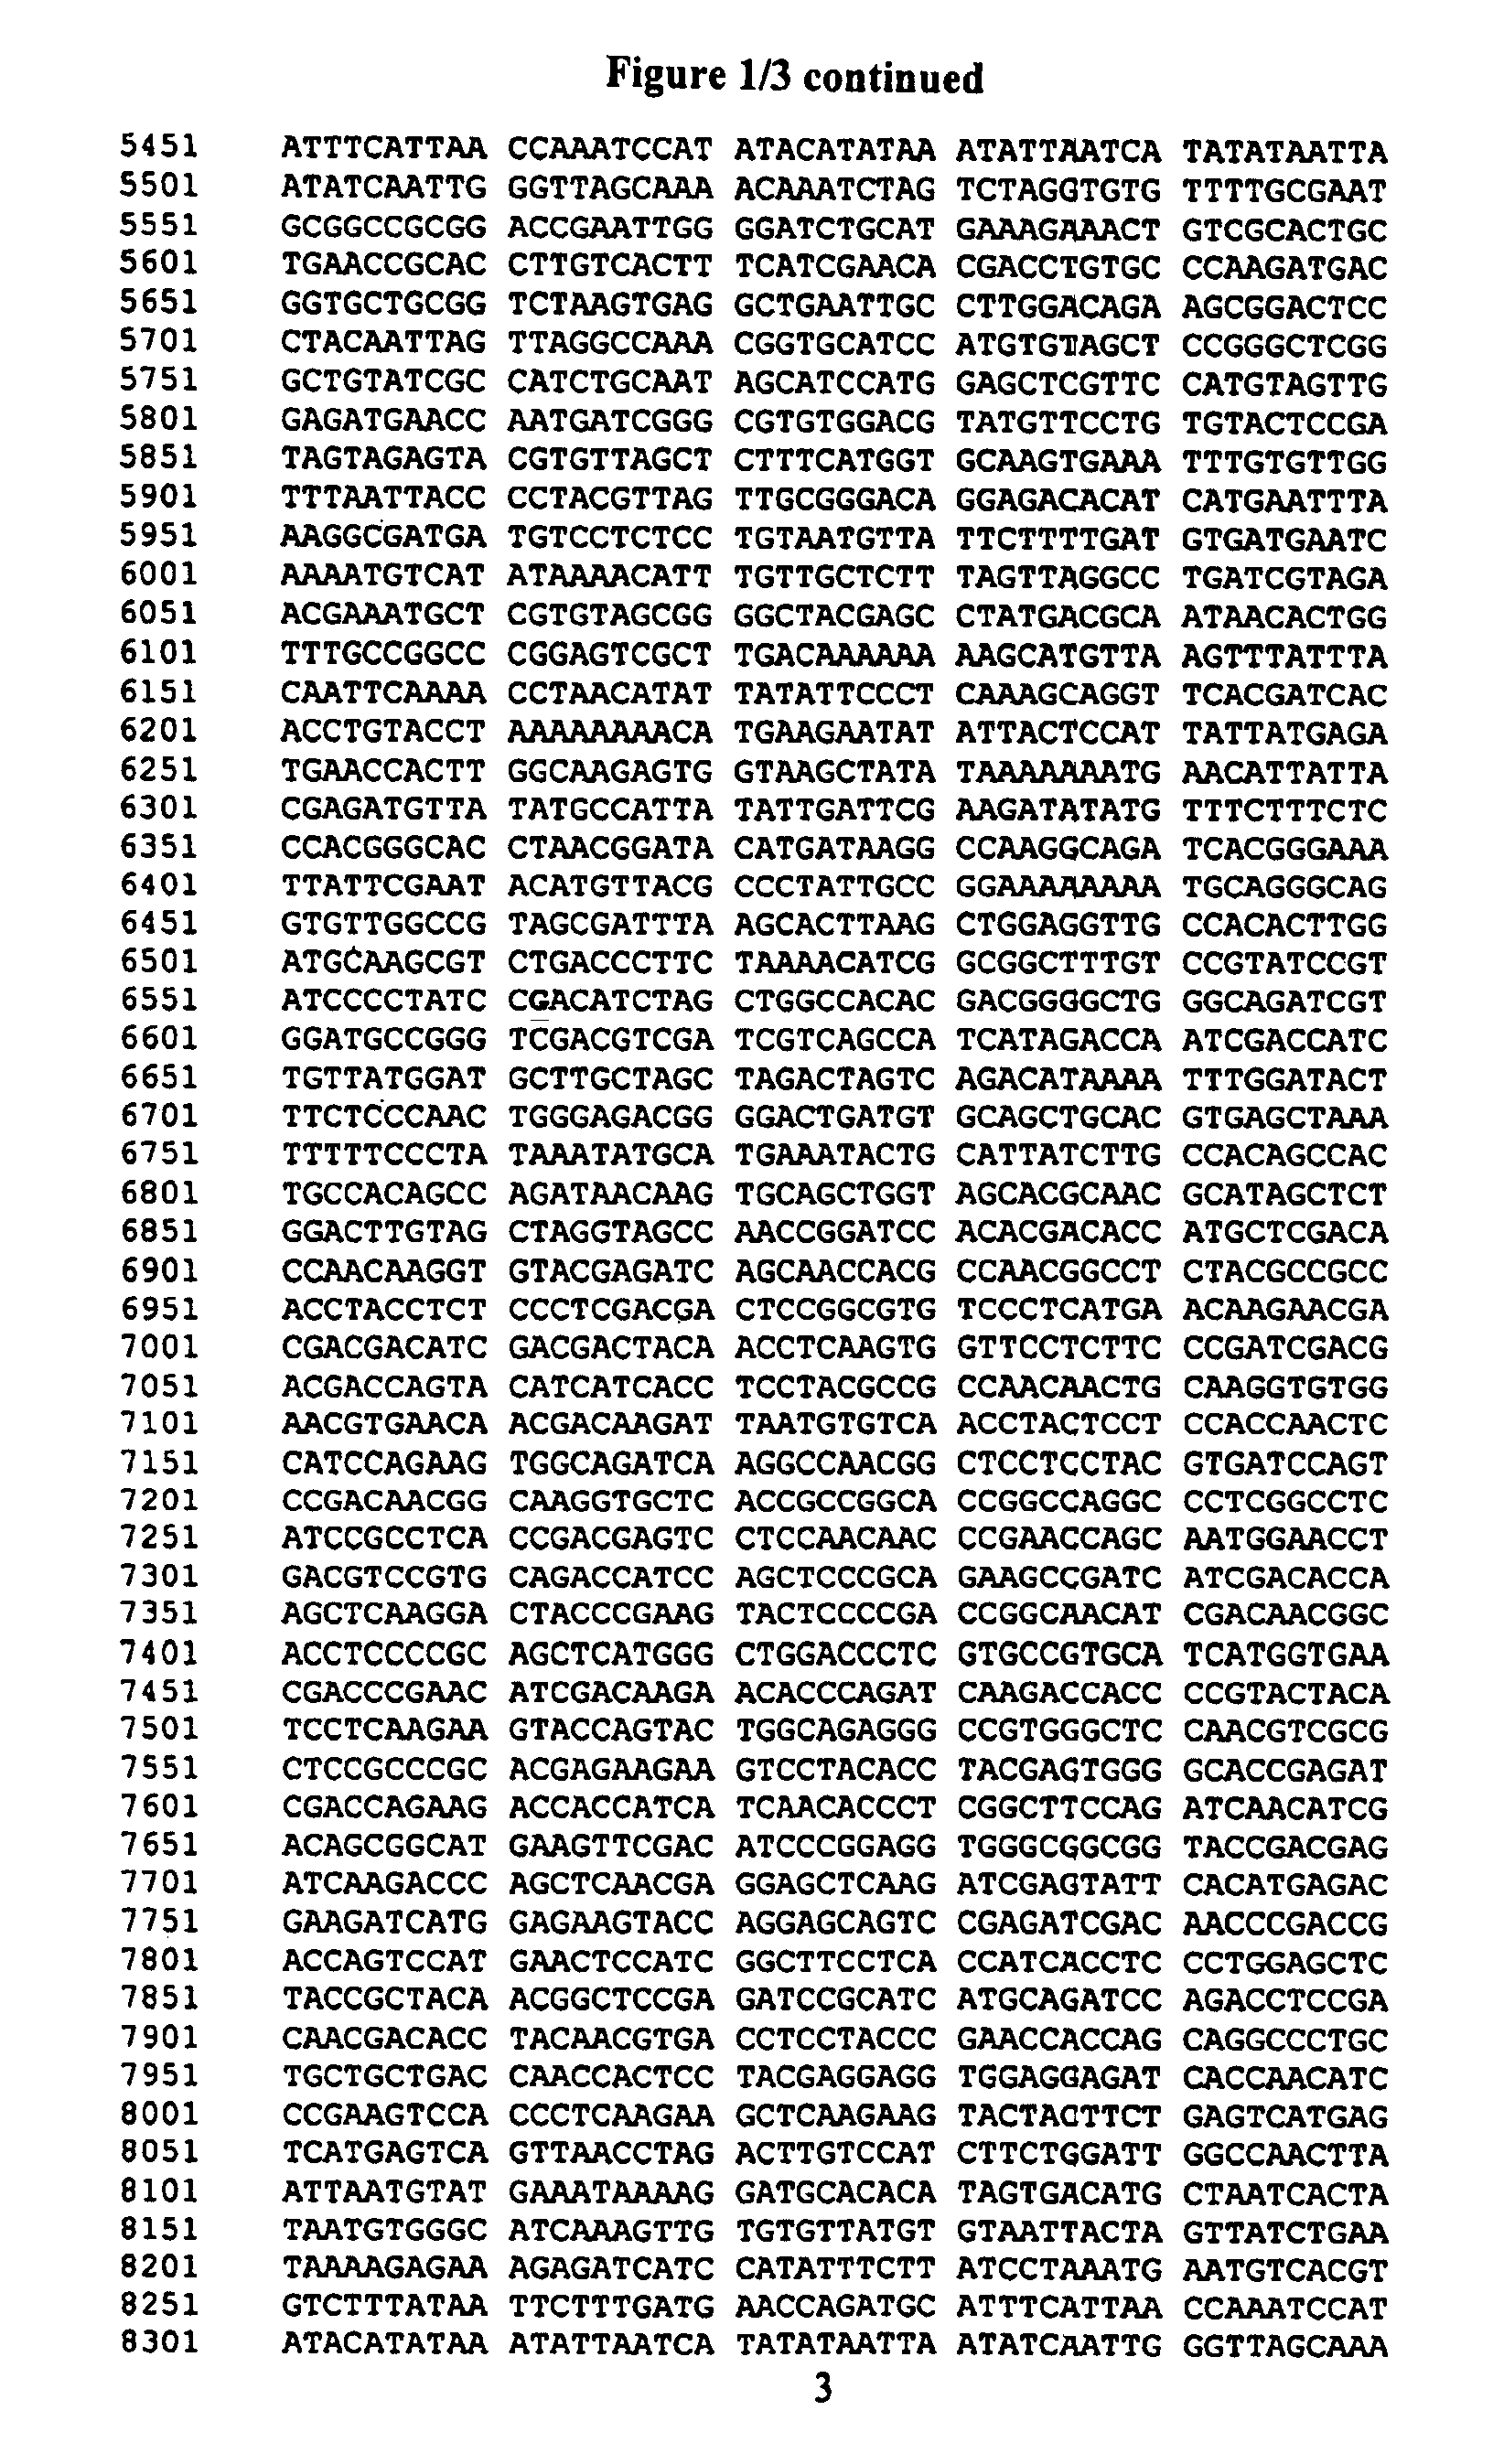 Corn event DAS-59122-7 and methods for detection thereof